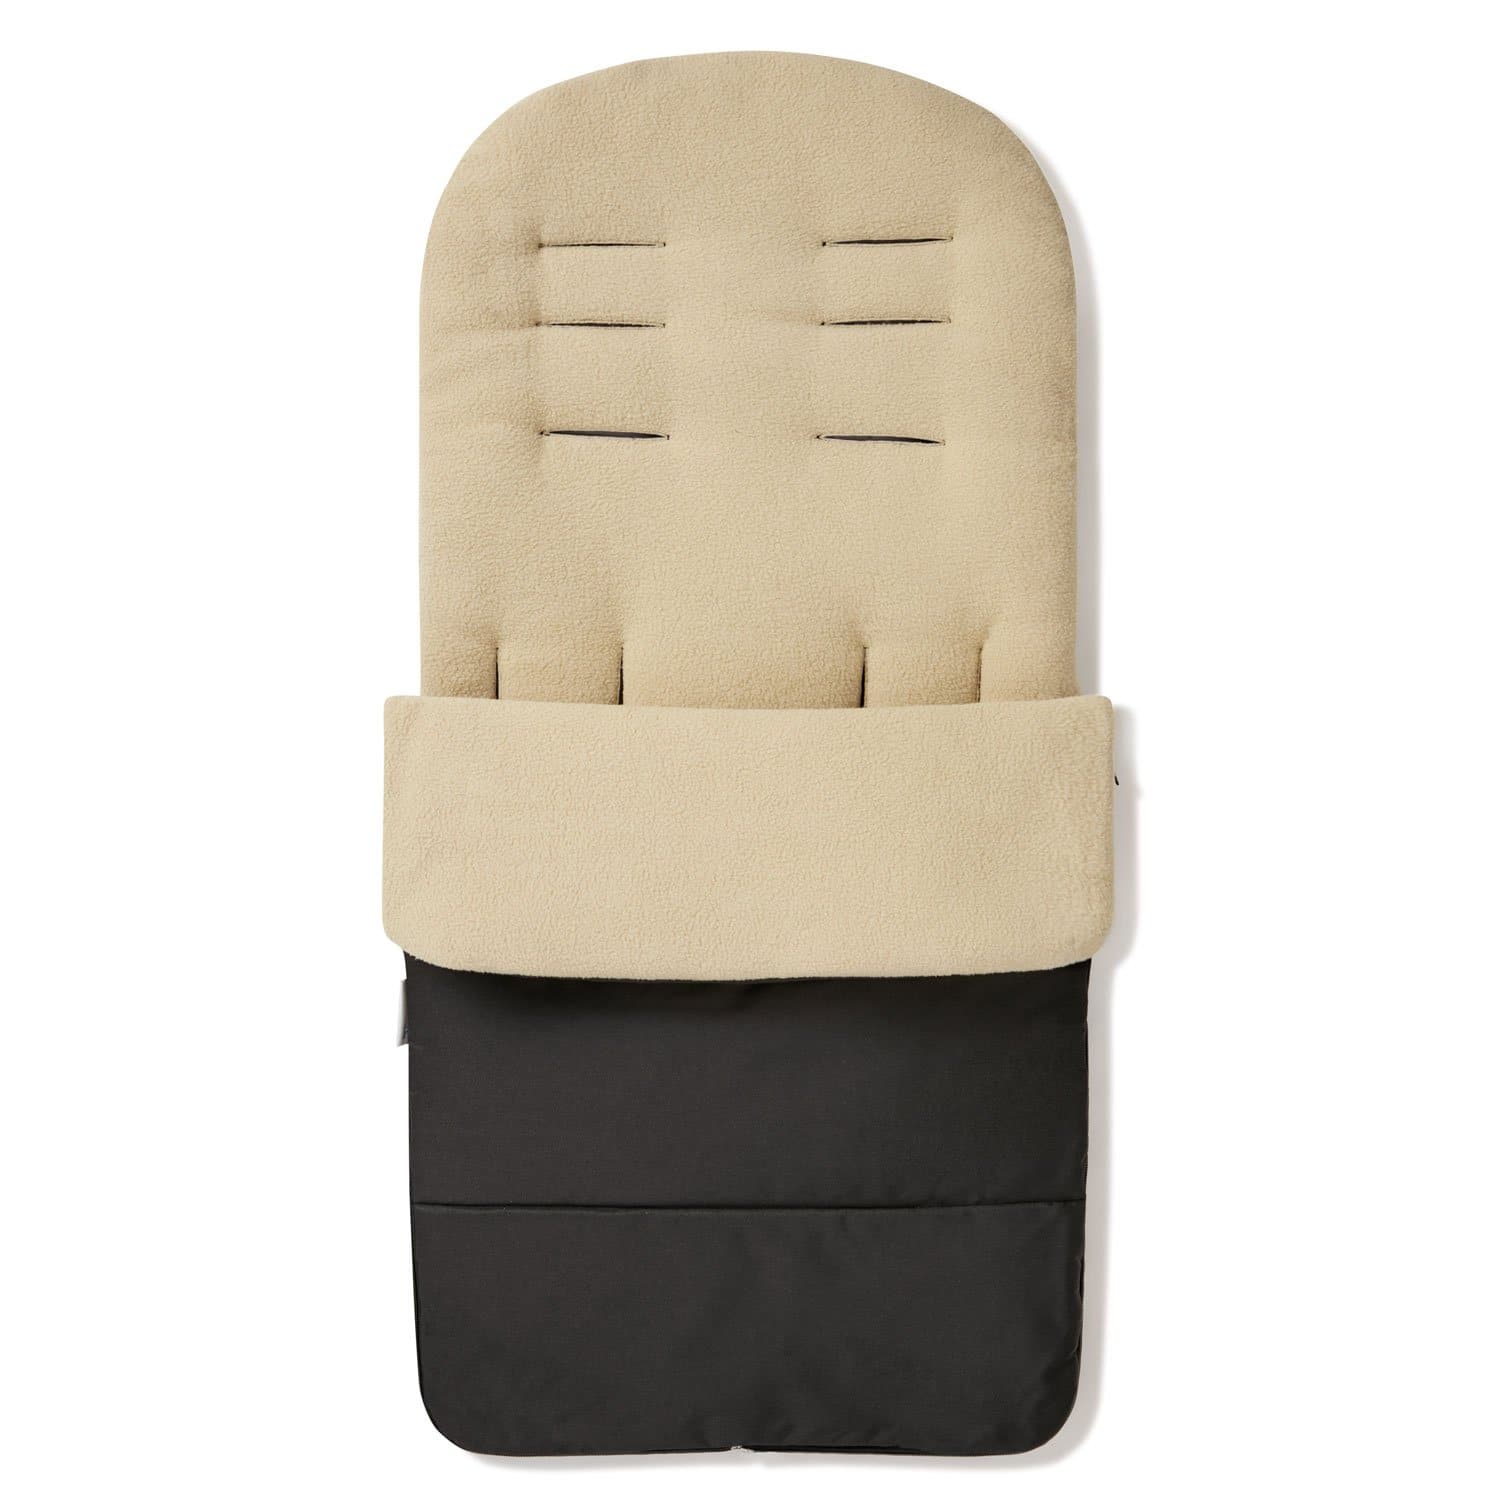 Premium Footmuff / Cosy Toes Compatible with BabiesRus - Desert Sand / Fits All Models | For Your Little One